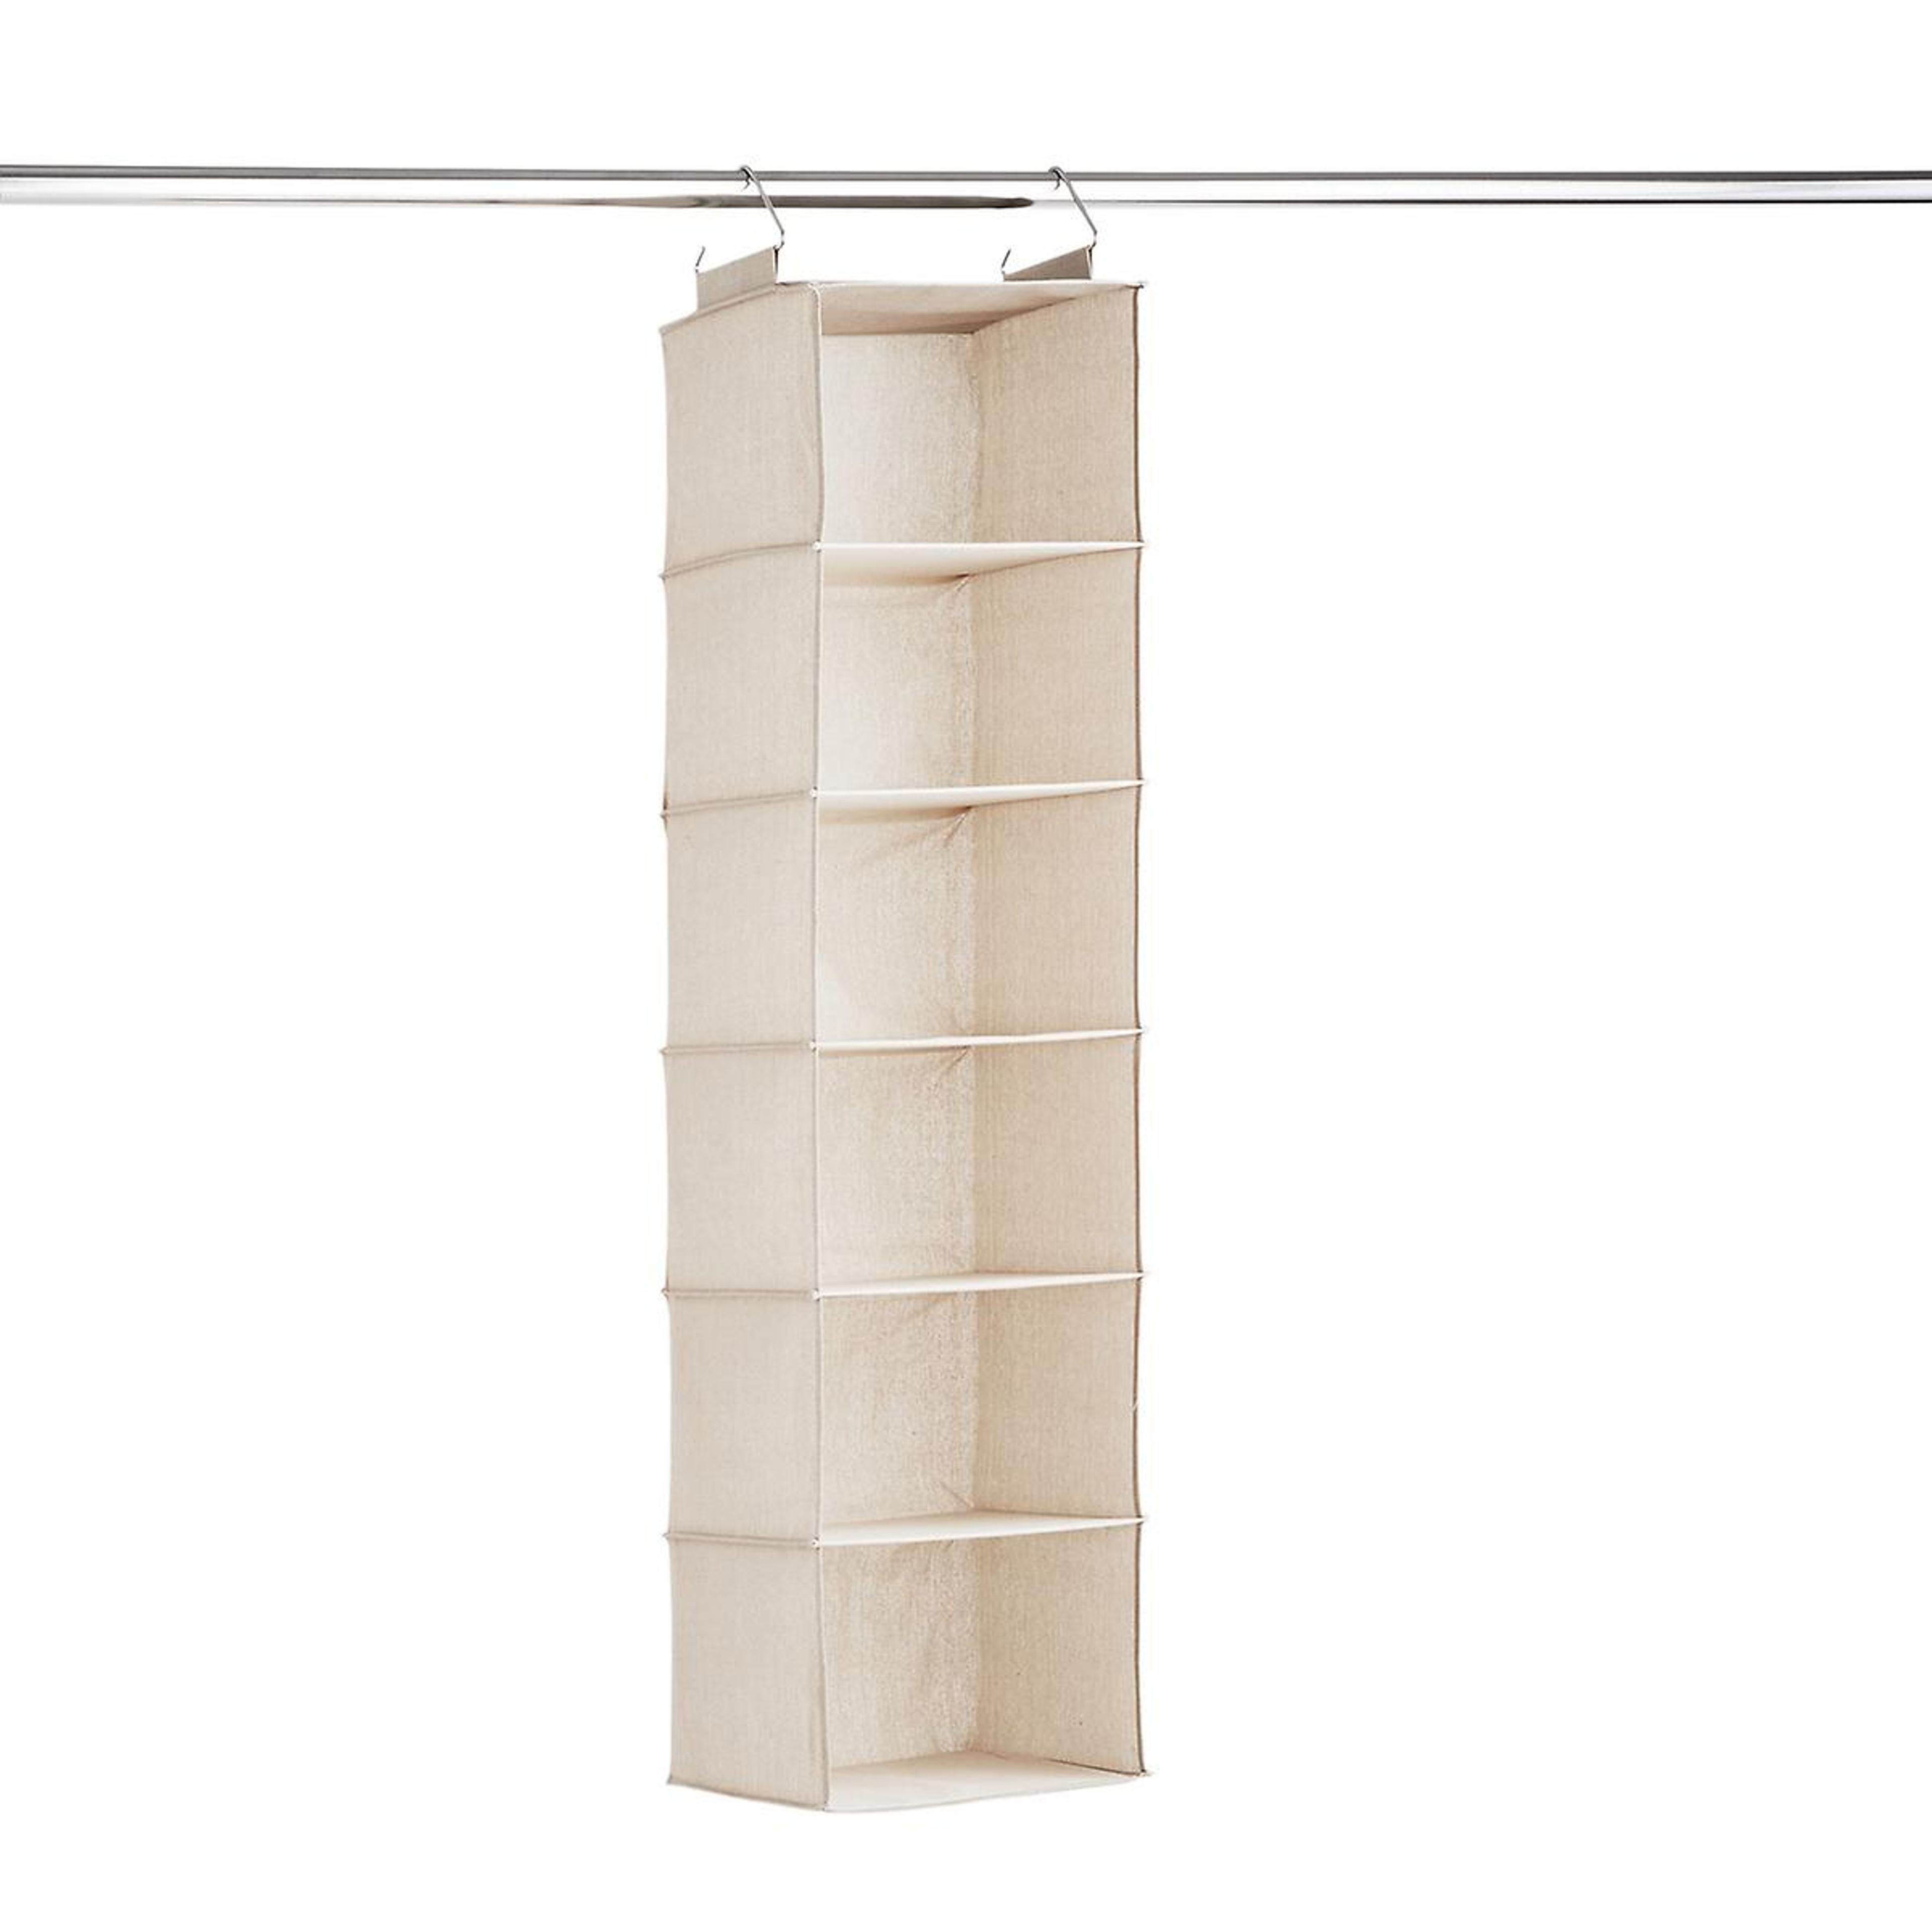 Hanging Sweater Organizer | The Container Store